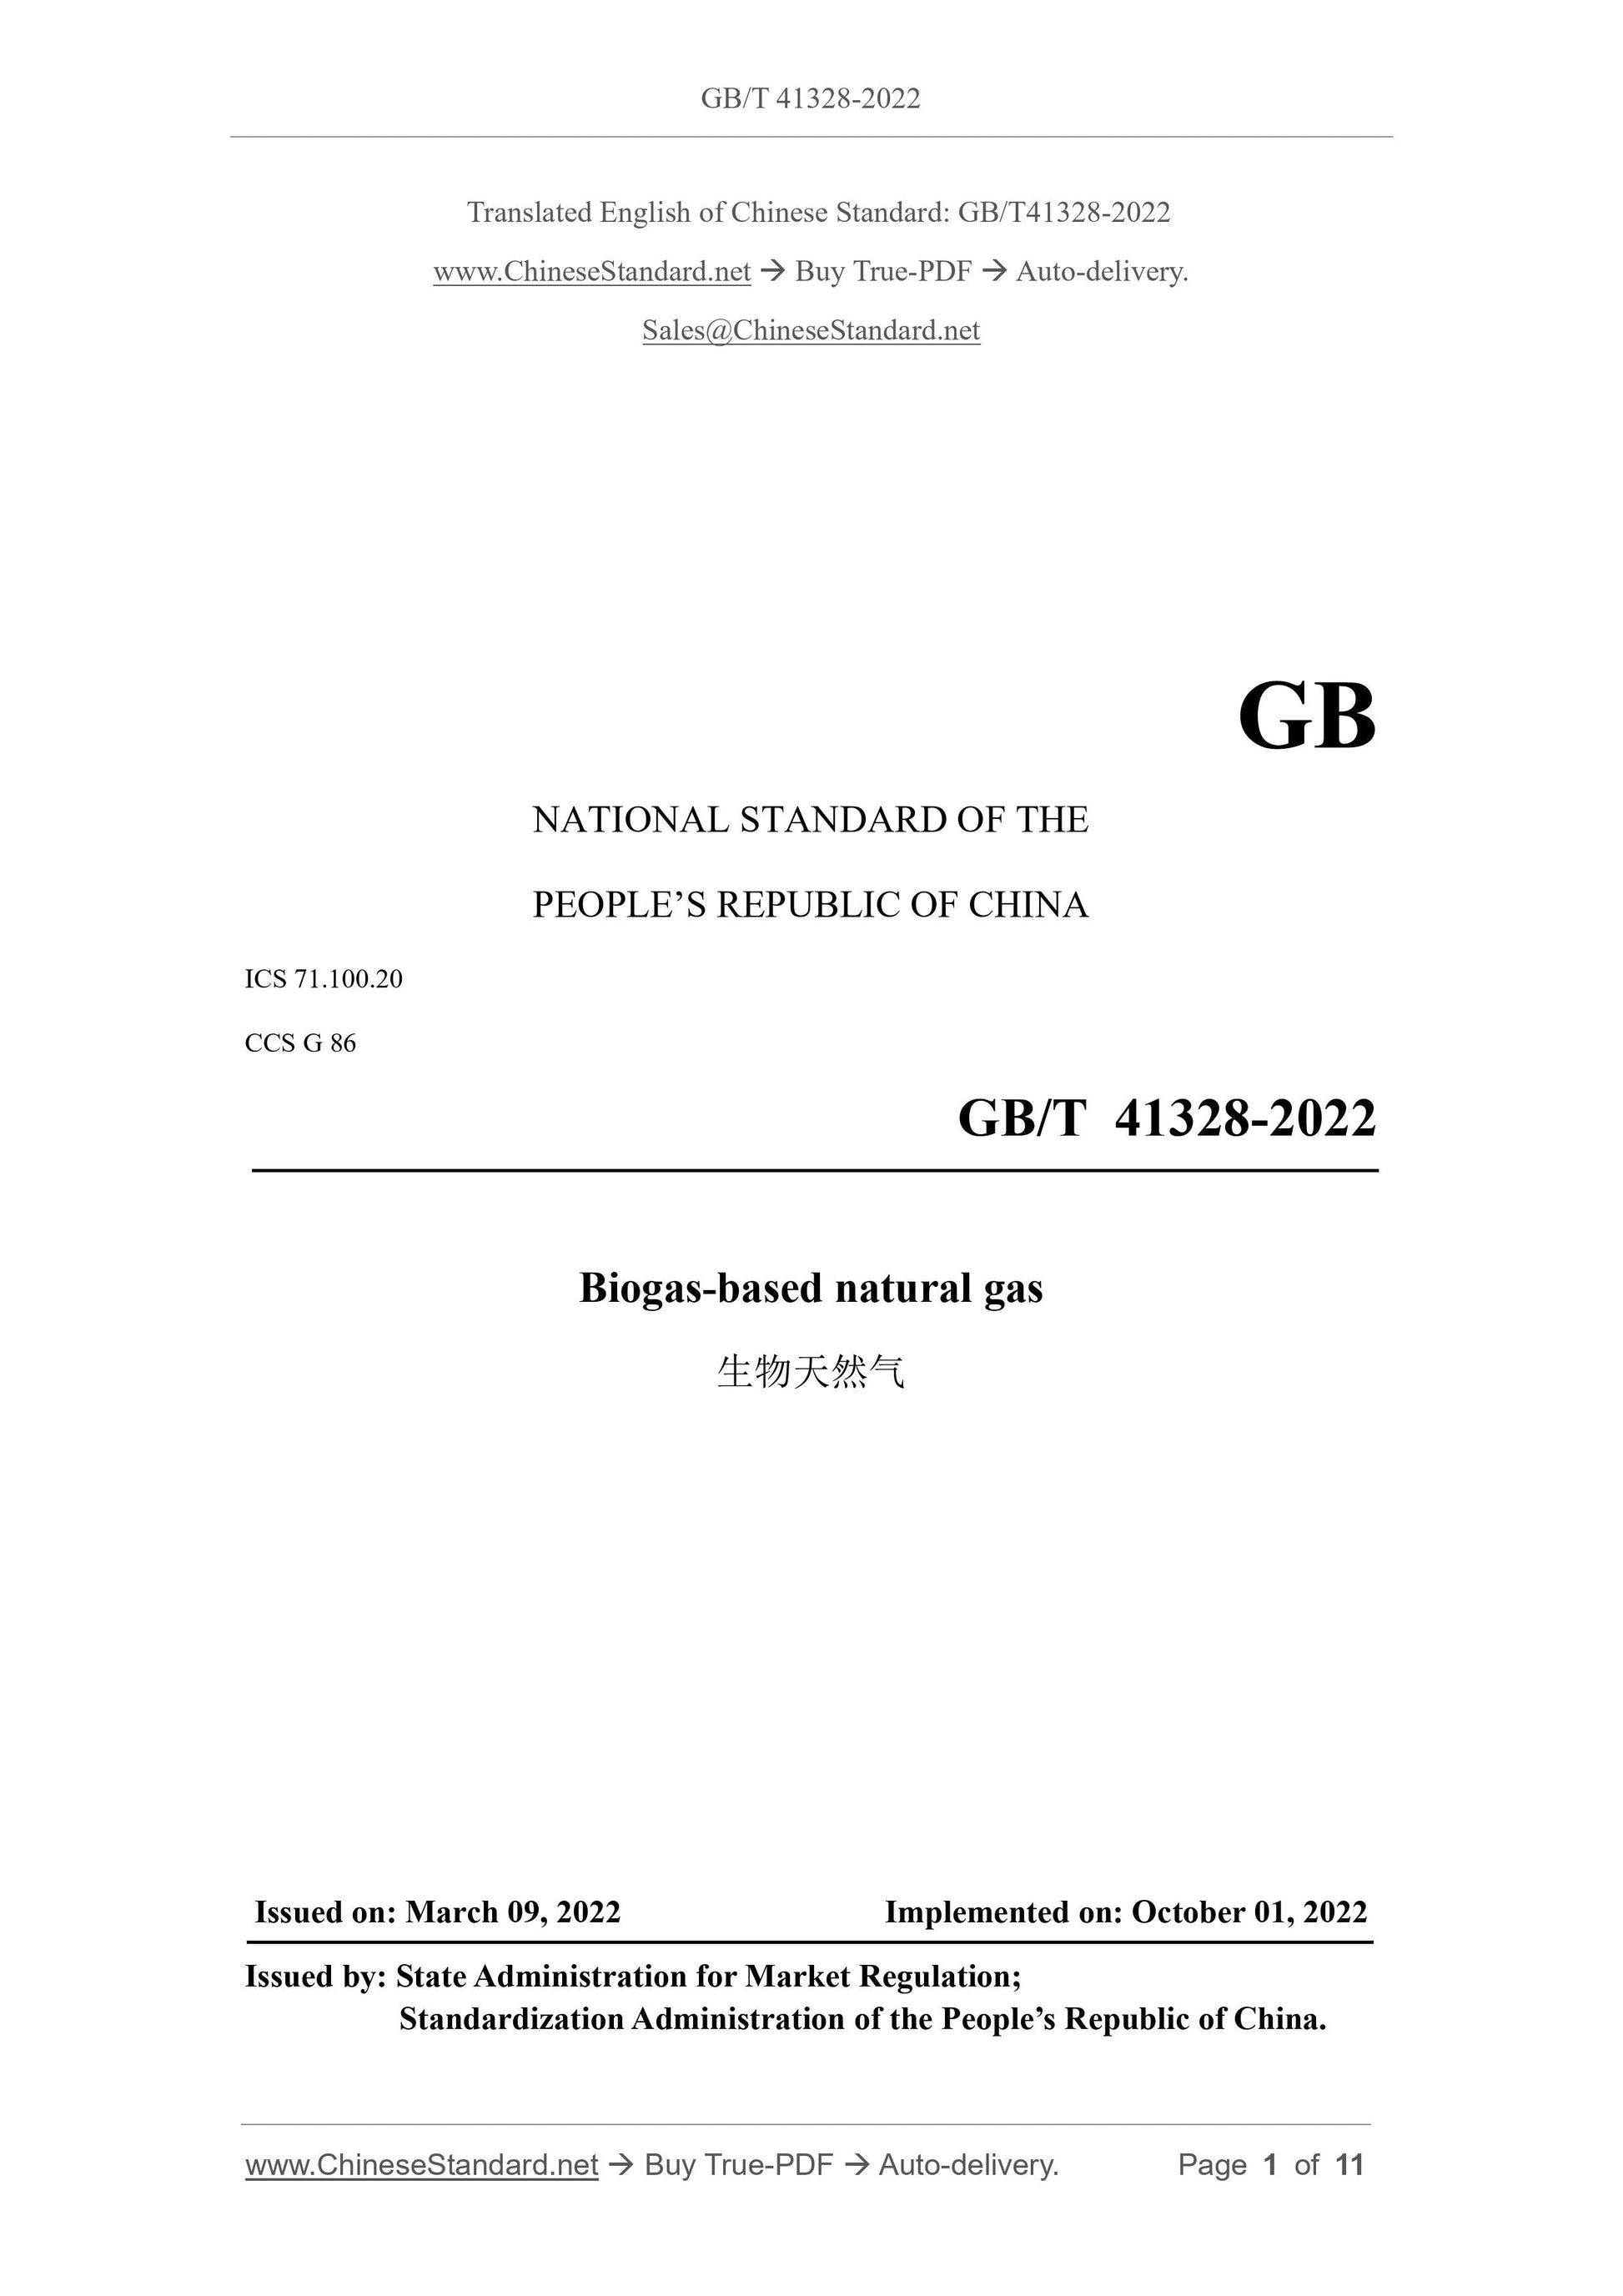 GB/T 41328-2022 Page 1